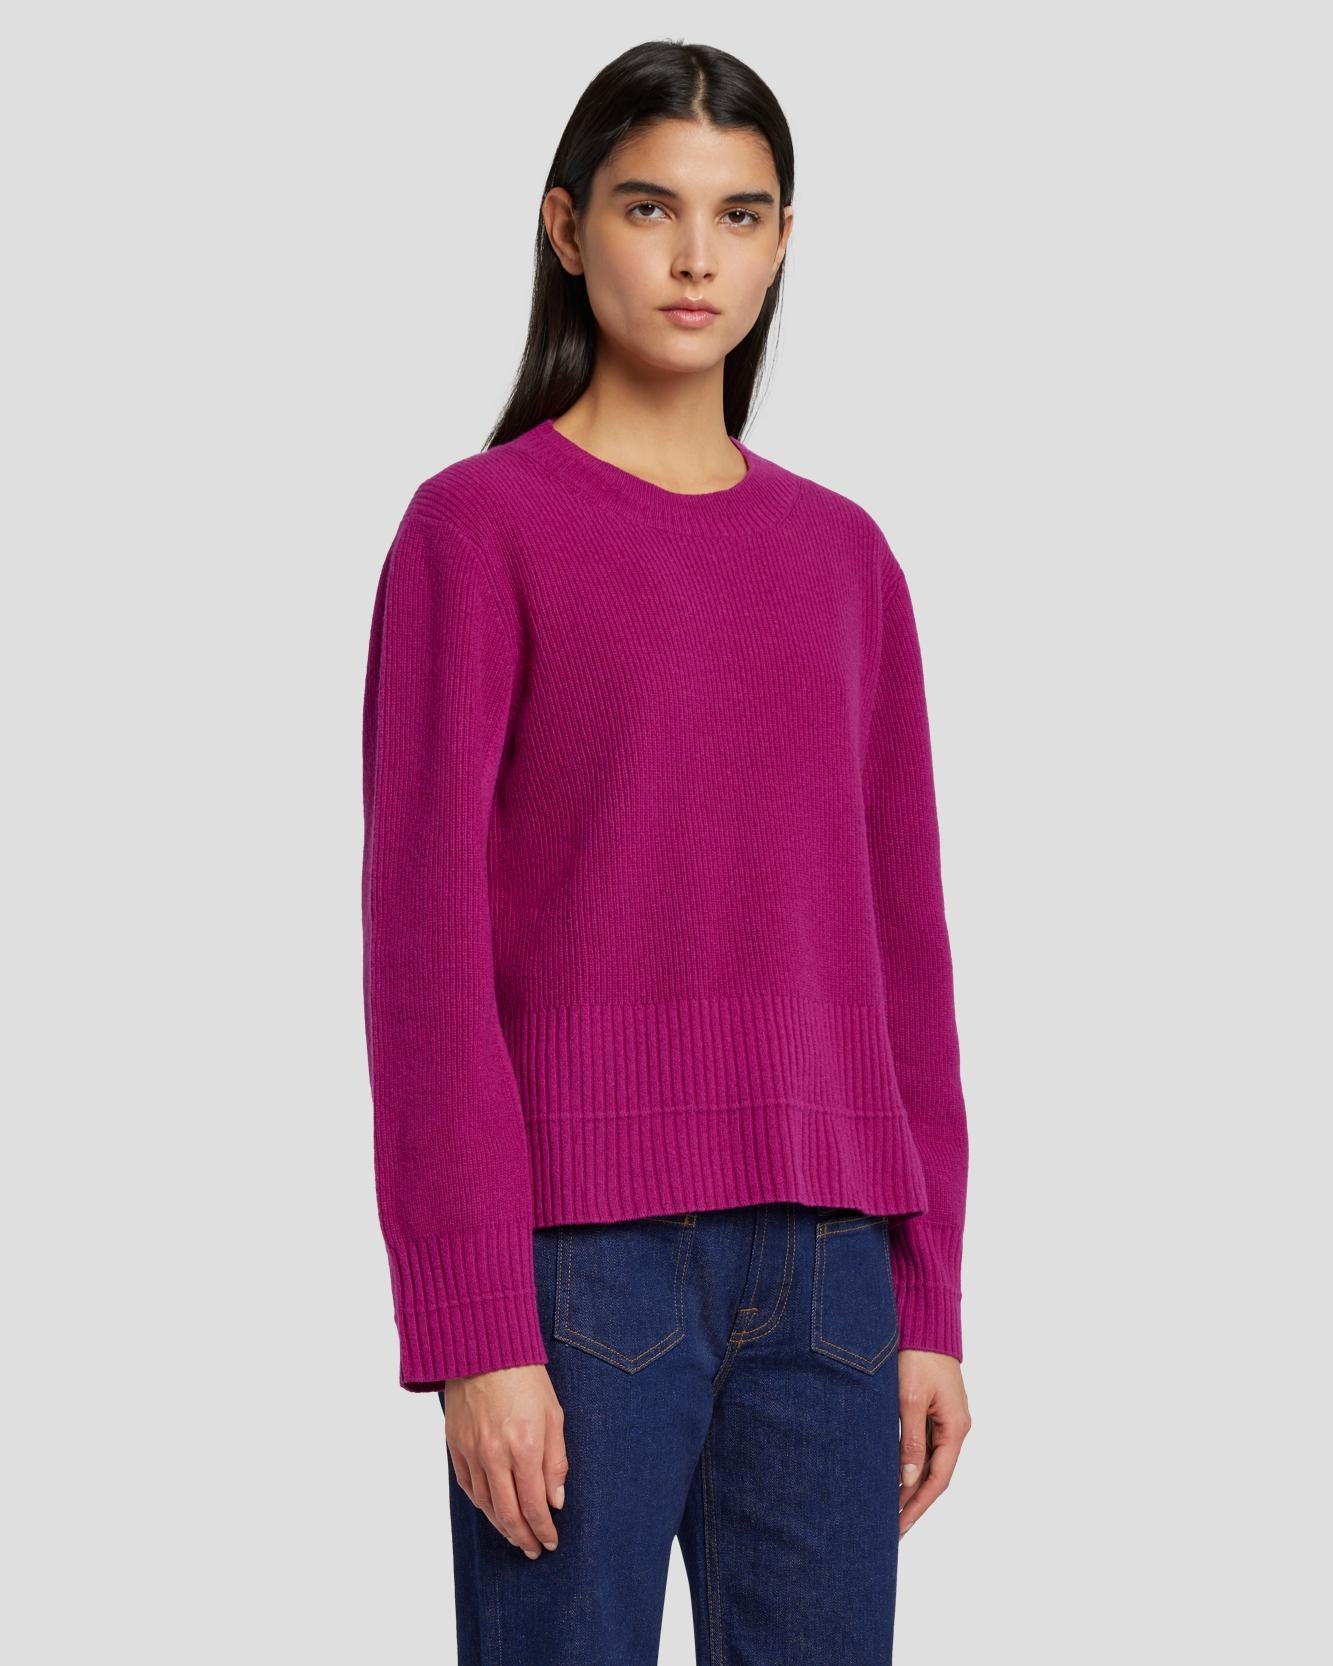 7 For All Mankind Cashmere Crewneck Sweater in Raspberry 7N122F34RBR